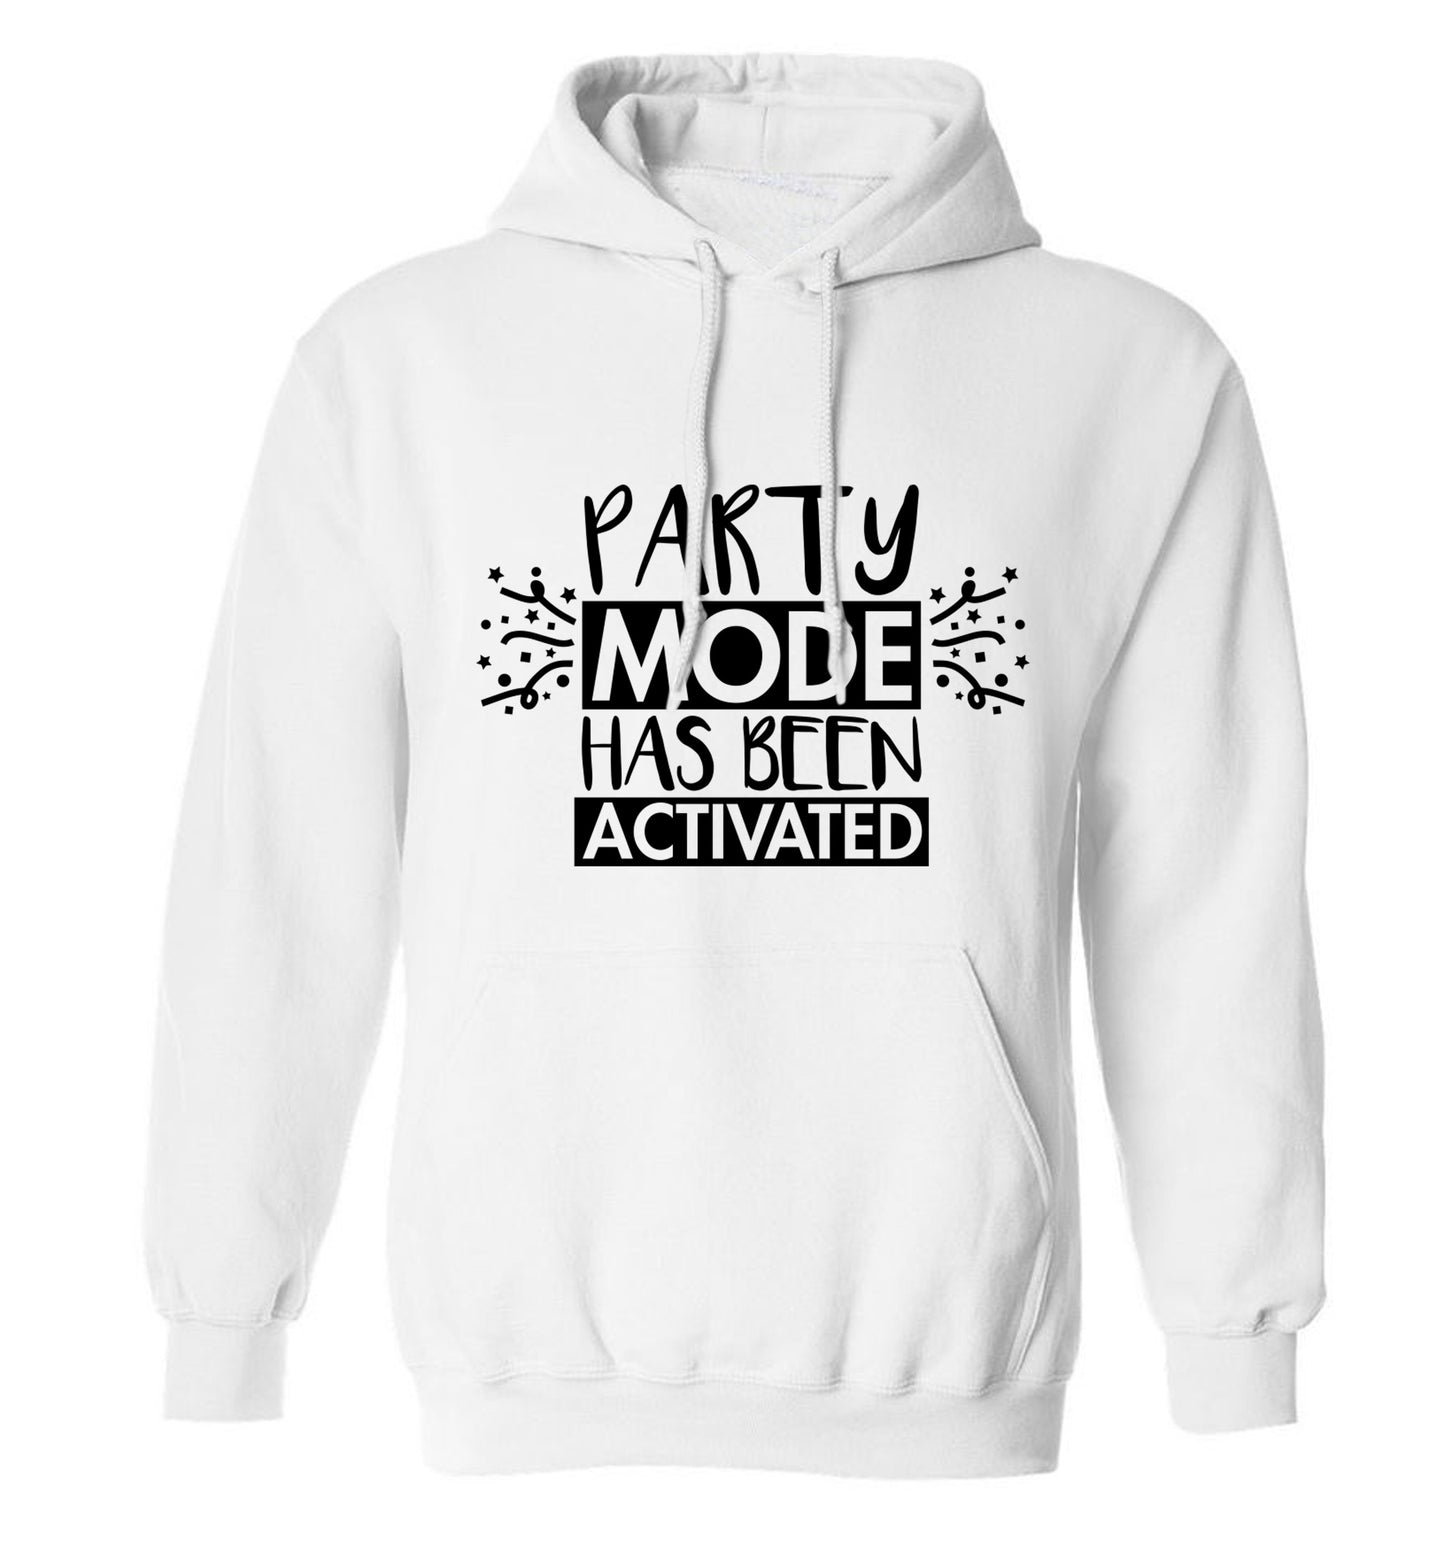 Please do not disturb party mode has been activated adults unisex white hoodie 2XL